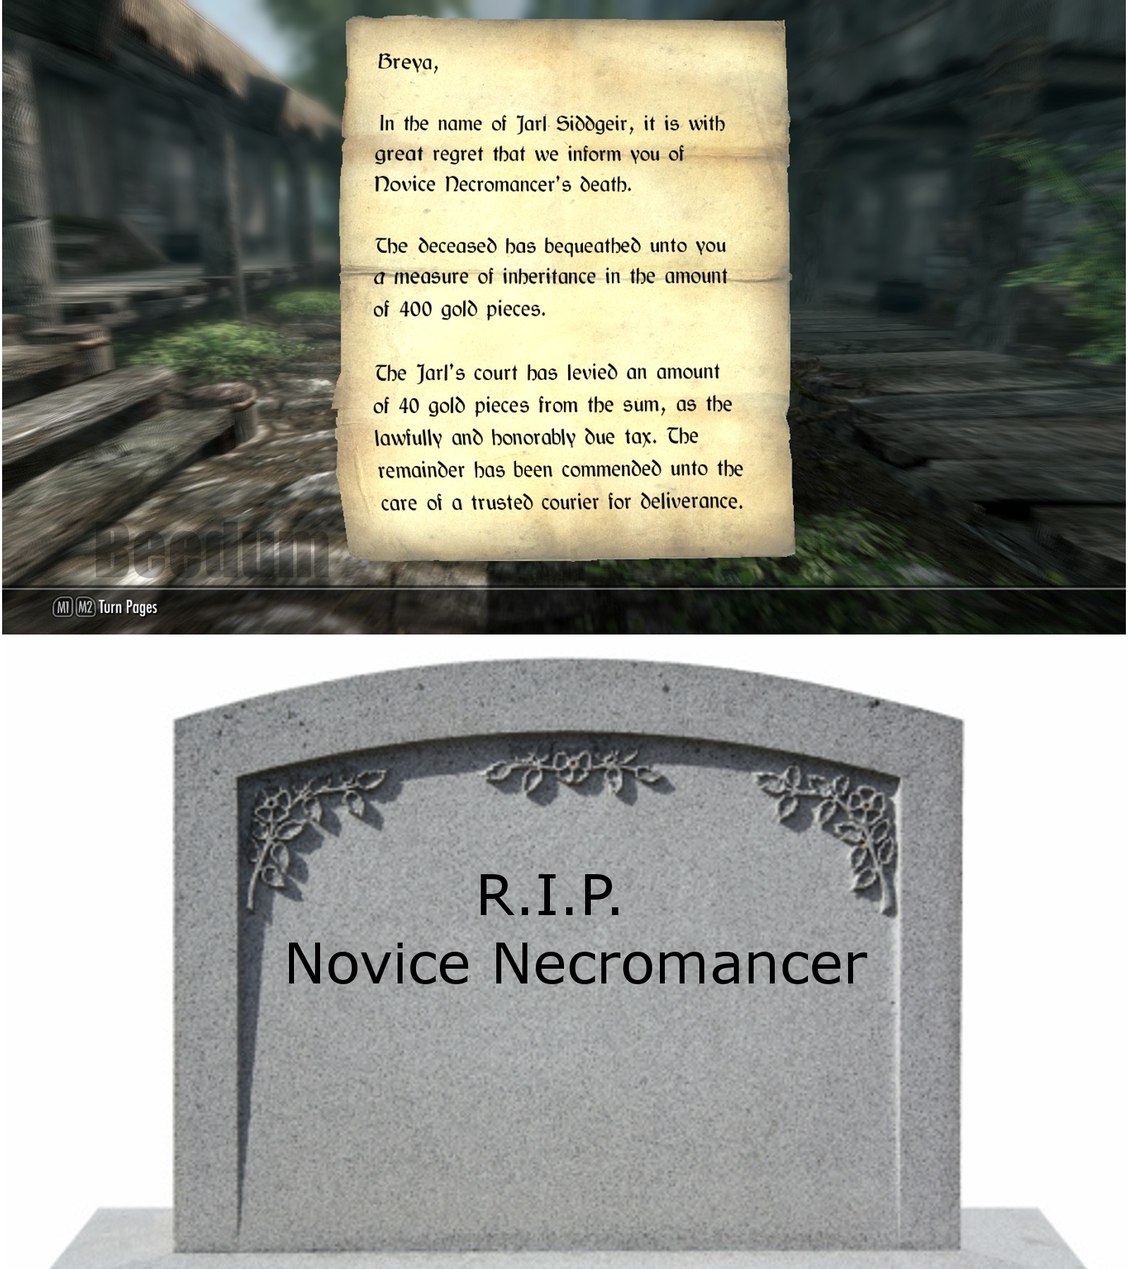 Your name will not be forgotten - meme